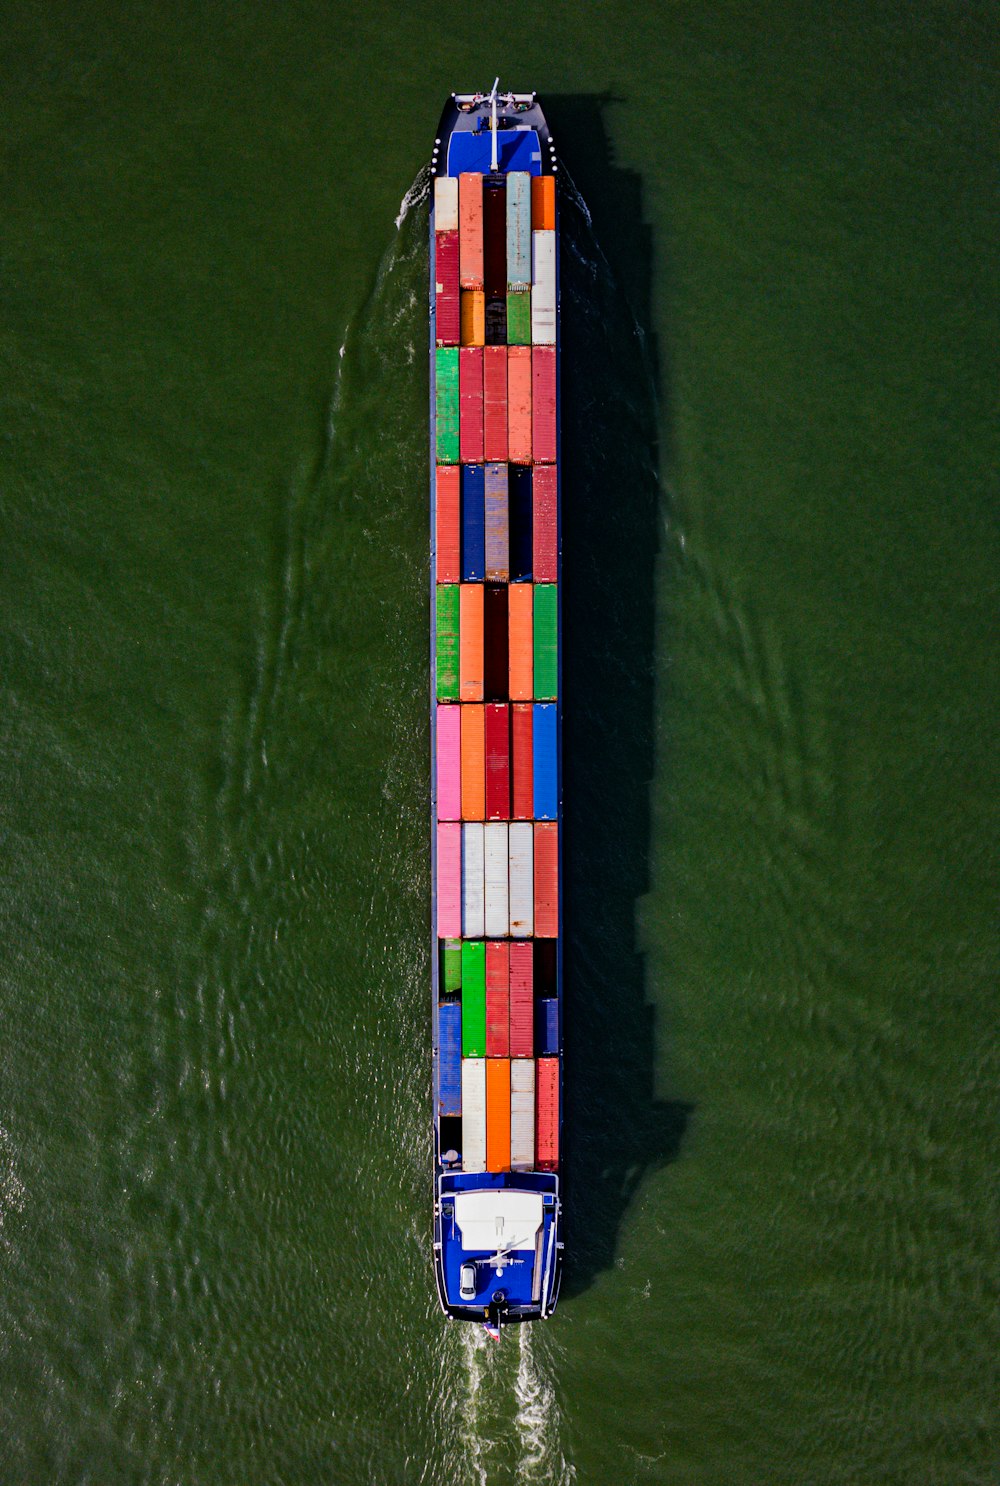 a large boat with a lot of colorful containers on it